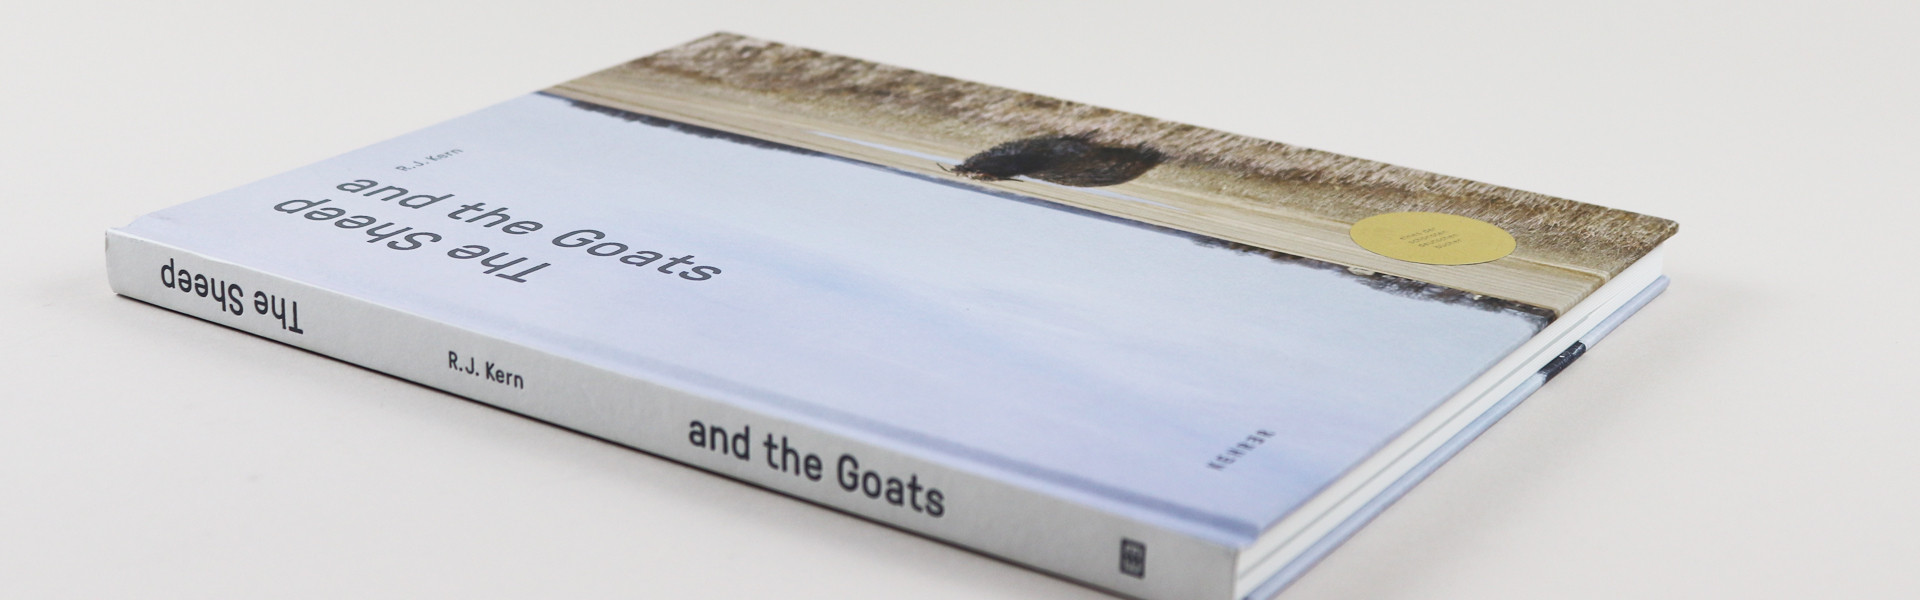 R.J. Kern The Sheep and the Goats 